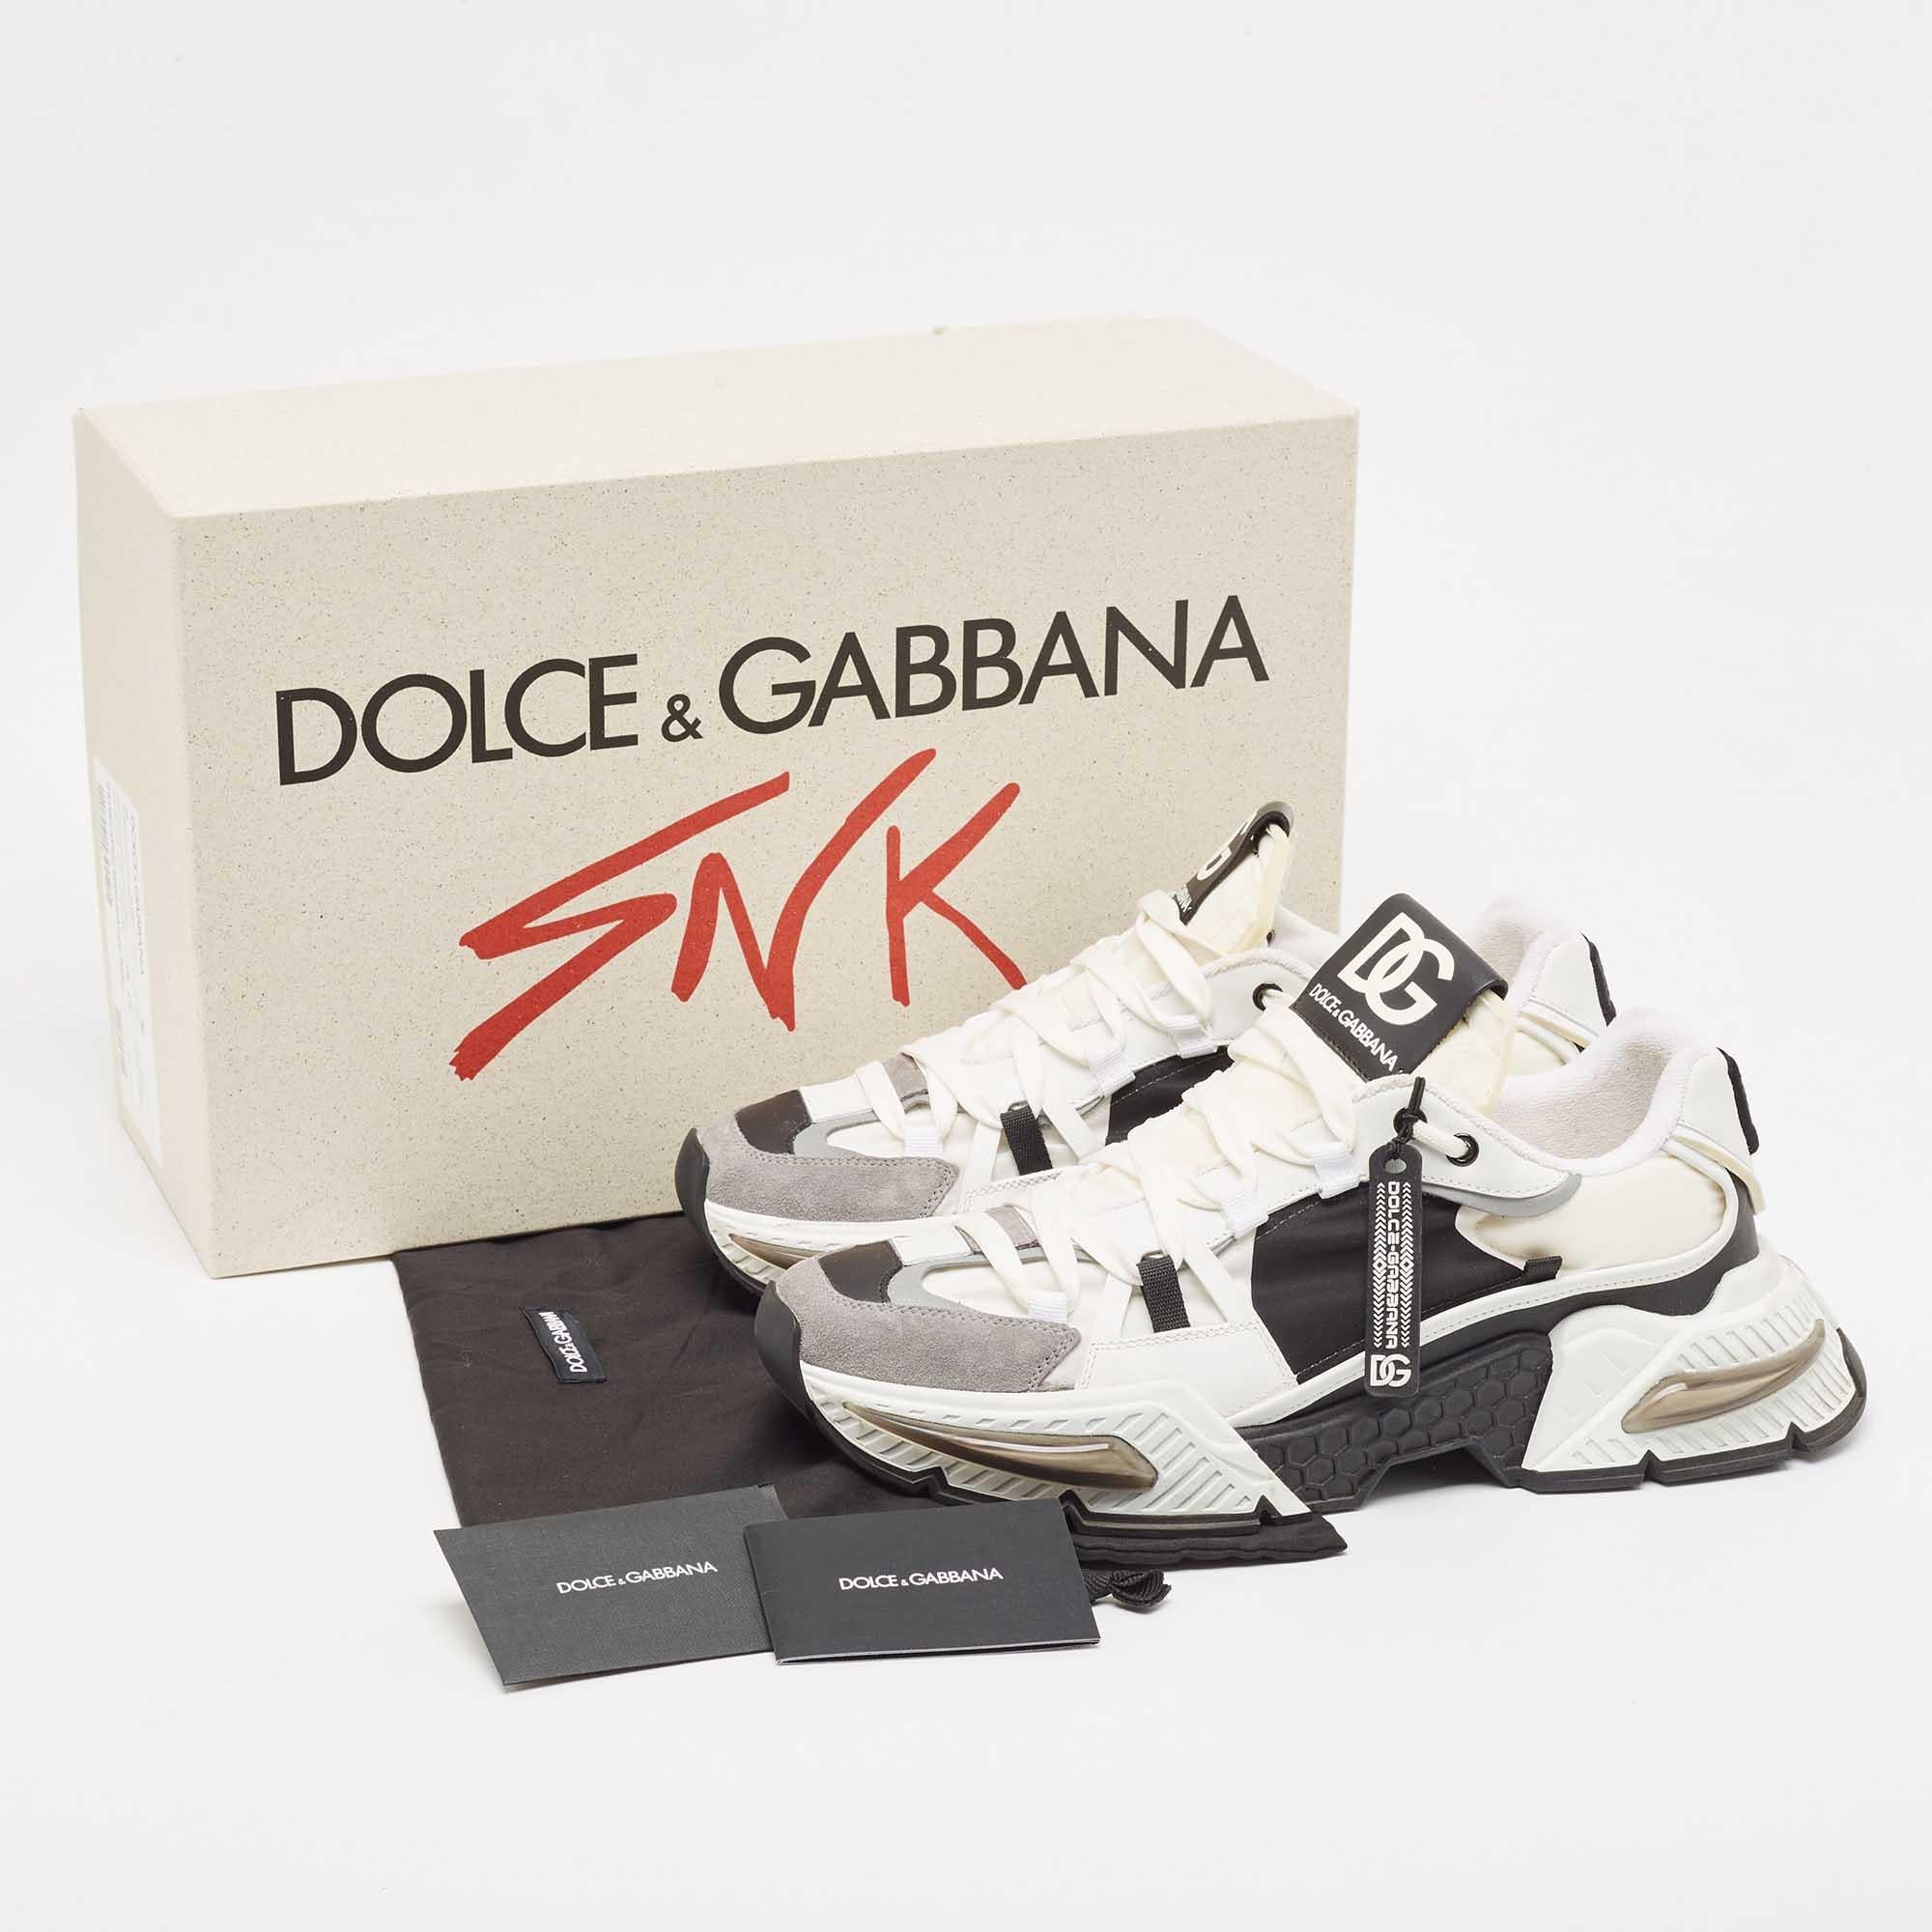 Dolce & Gabbana White/Black Neoprene and Suede Airmaster Sneakers Size 44 4